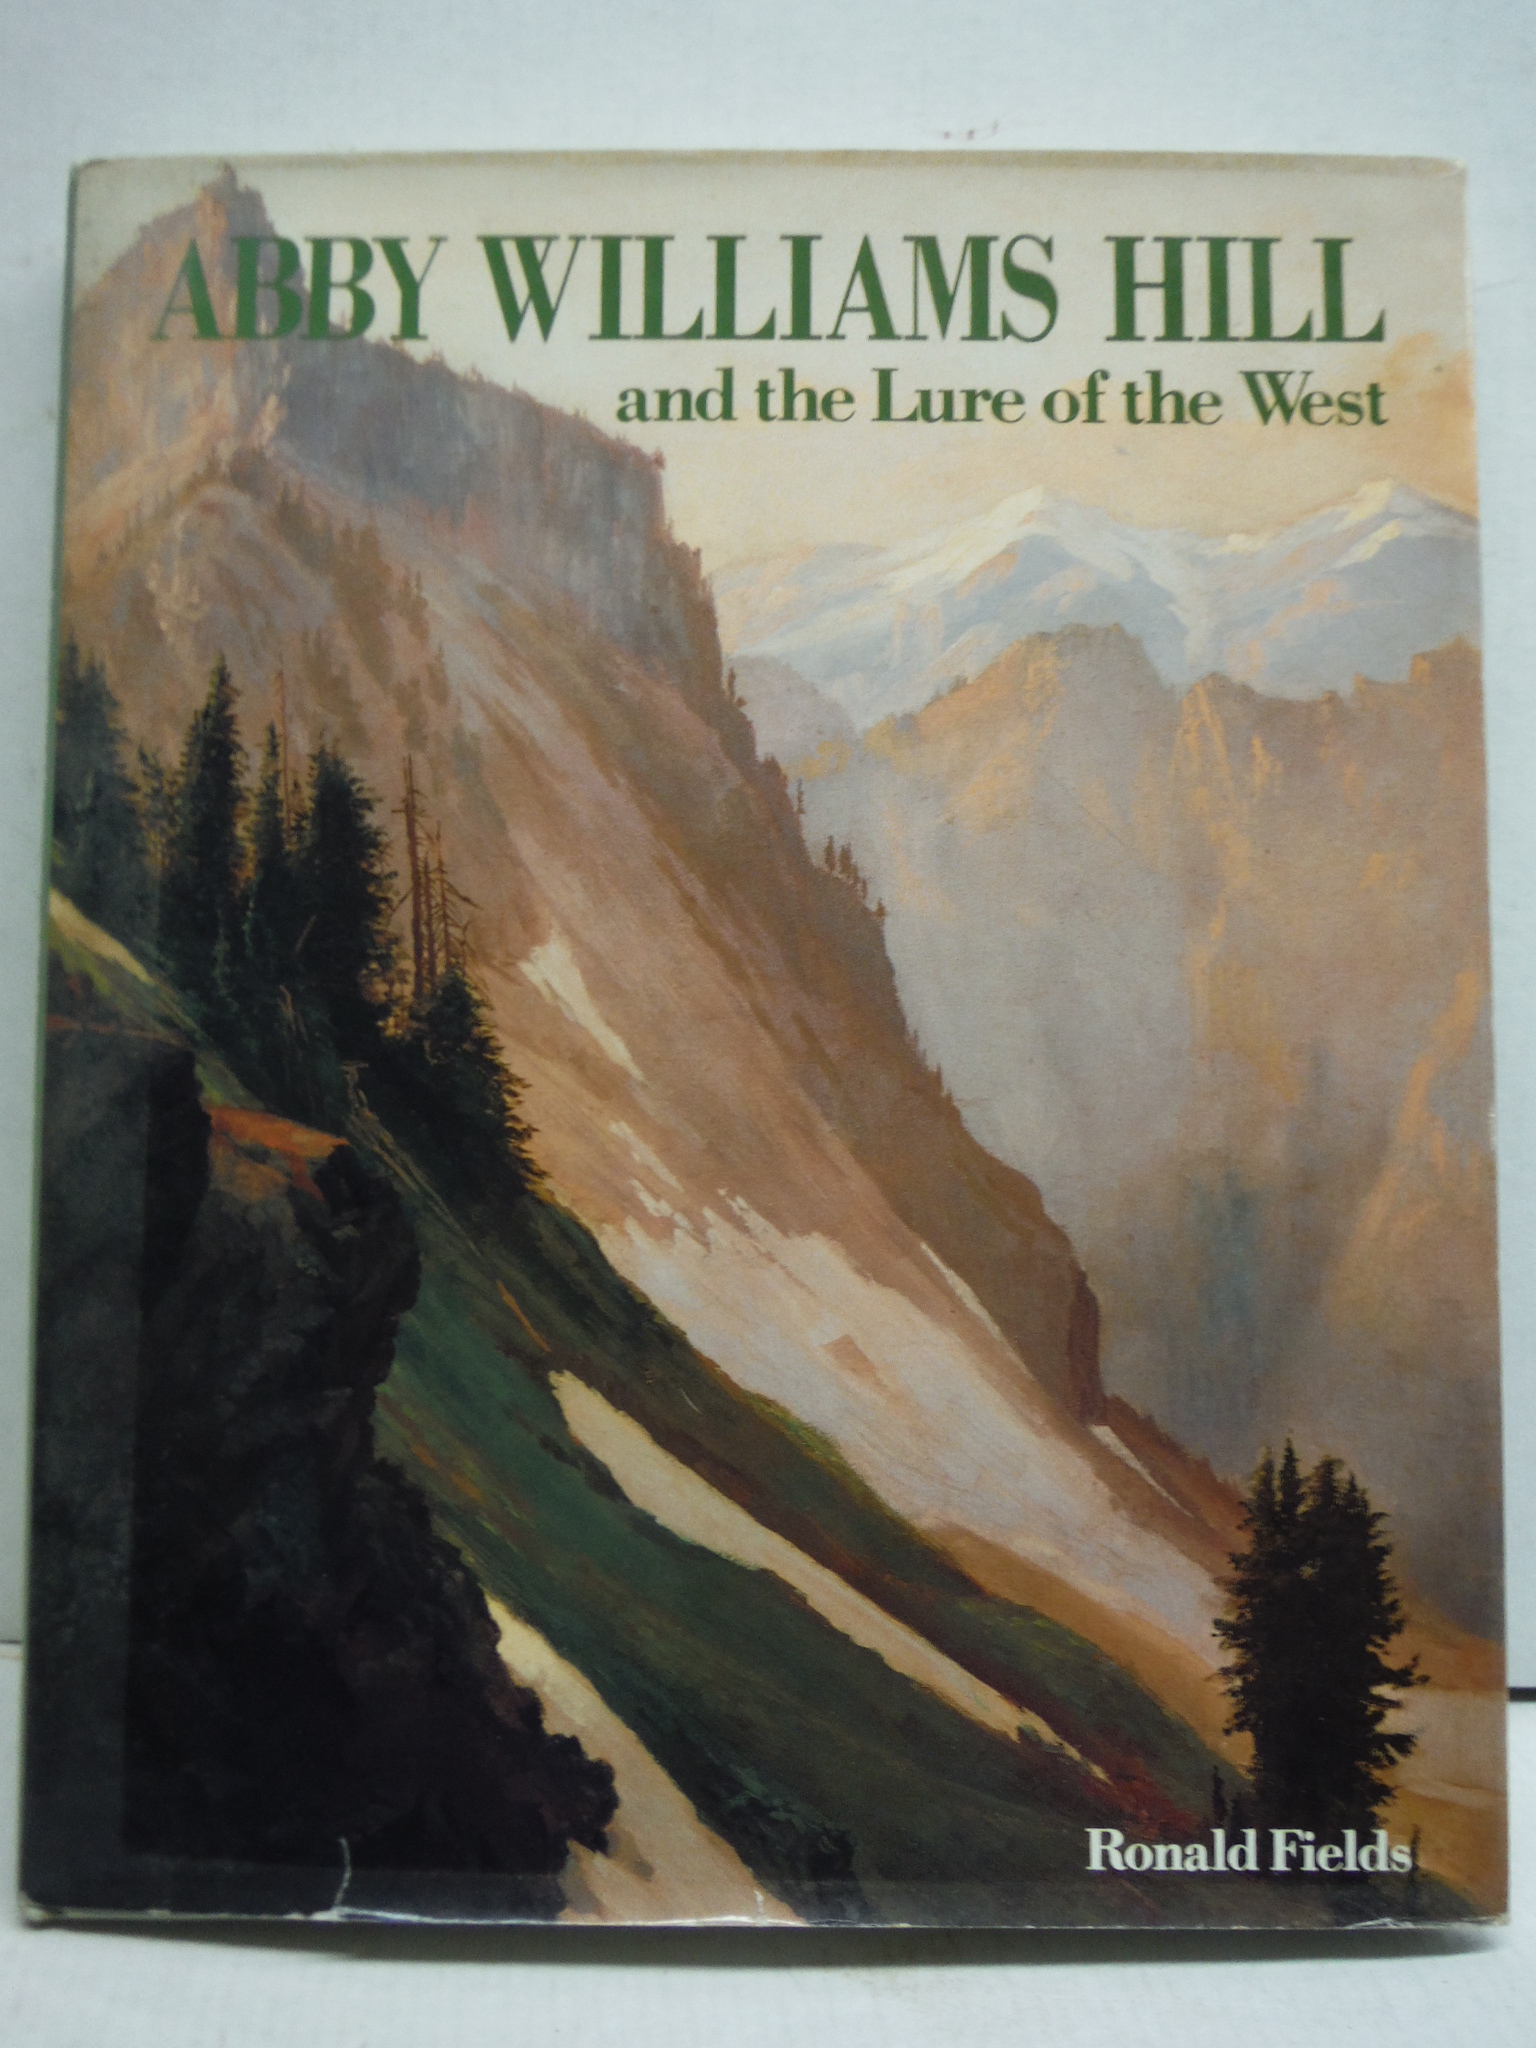 Abby Williams Hill and the lure of the West